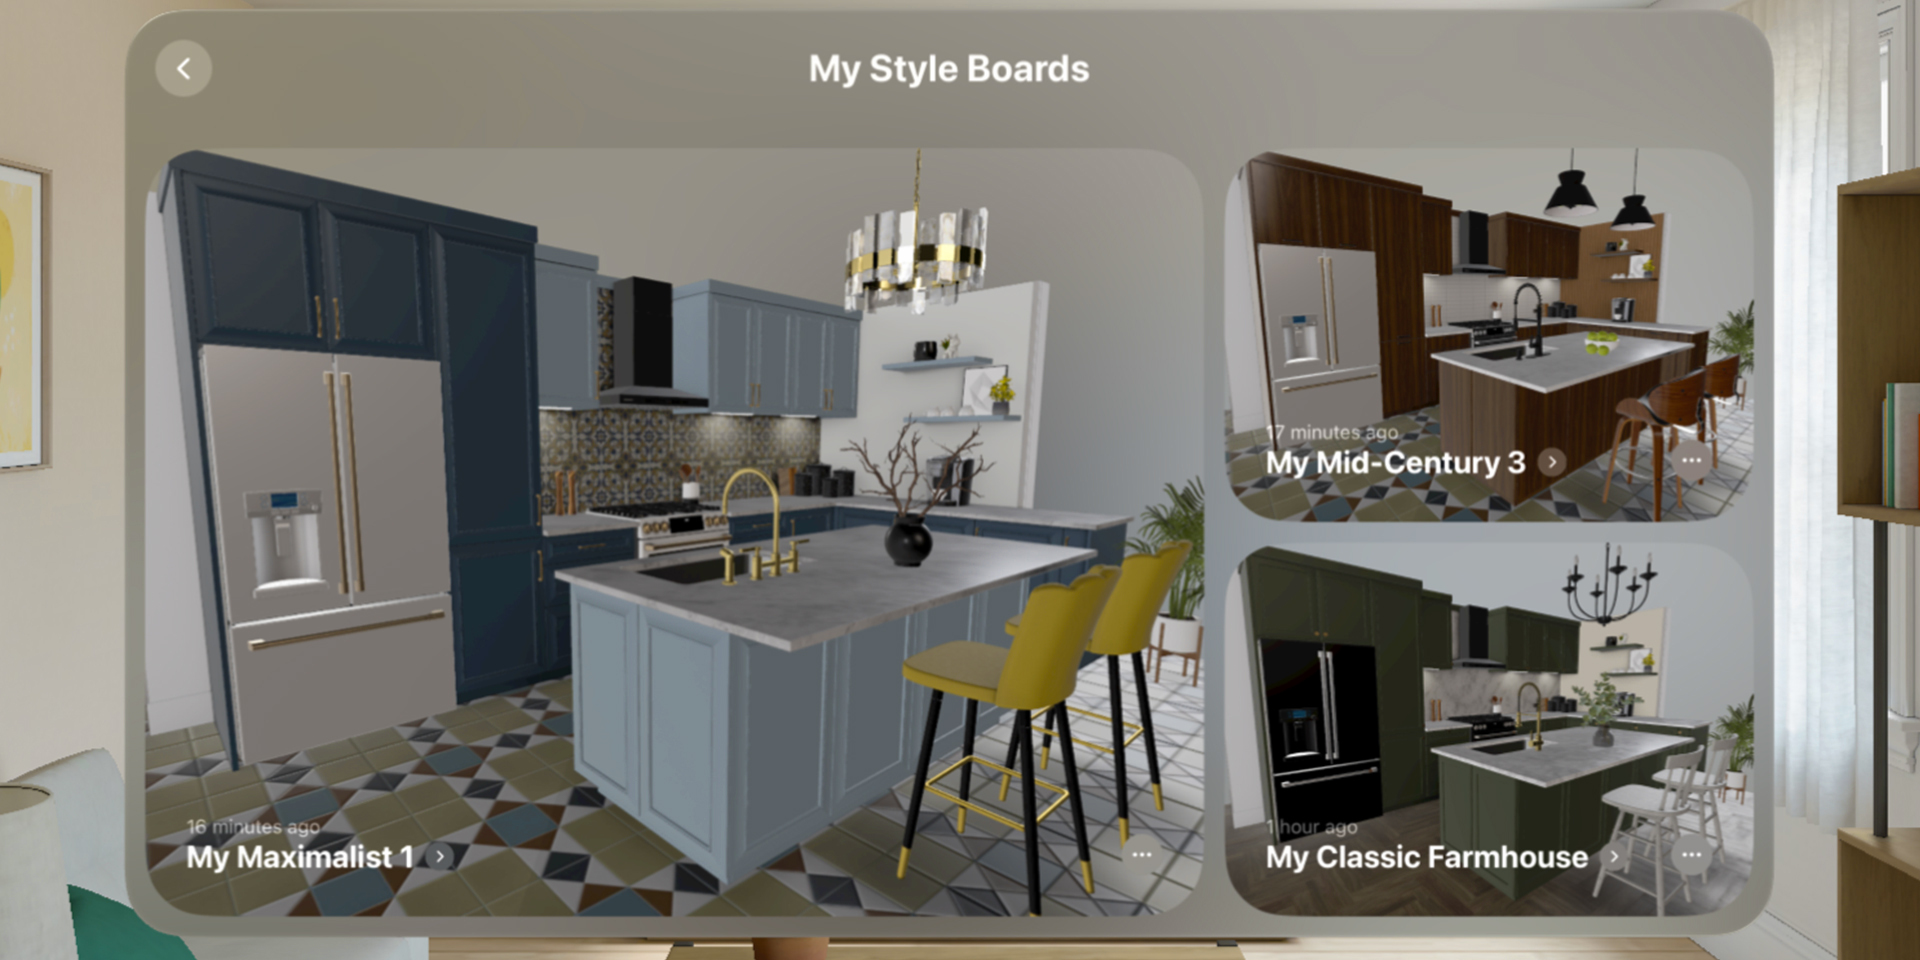 Image of Style Board page seen within Lowe's Innovation Labs Lowes Style Studio app experience.